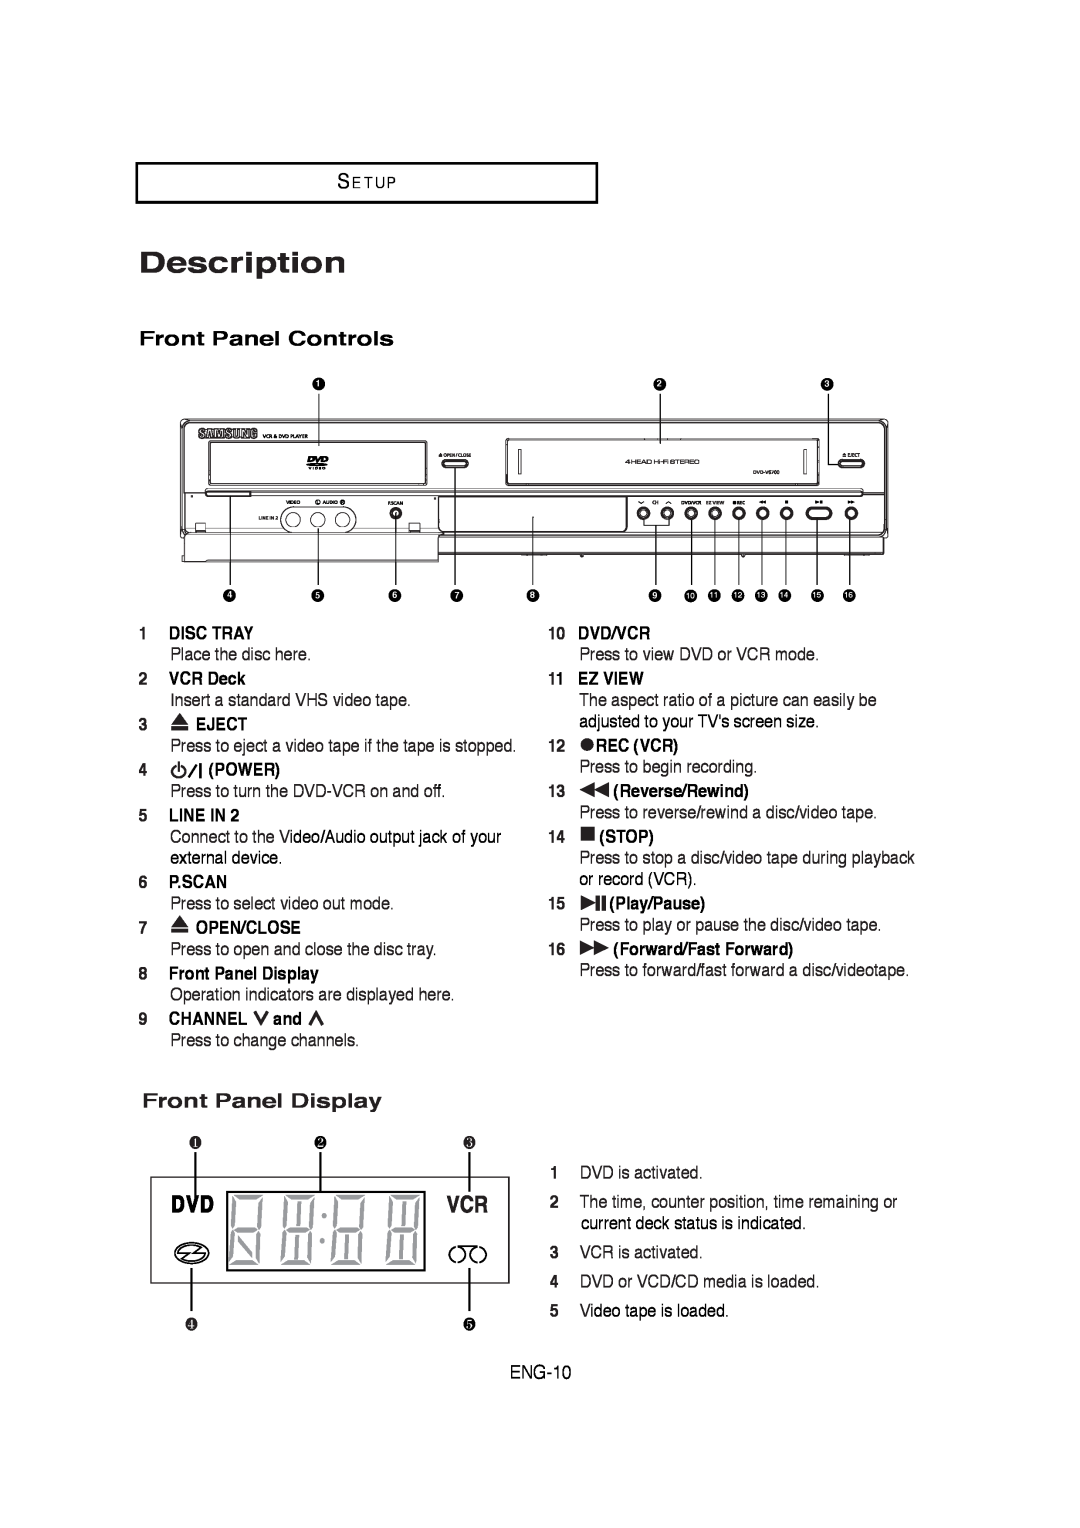 Samsung 01304A Description, Front Panel Controls, Front Panel Display, Disc Tray, VCR Deck, Eject, Power, Line In, Ez View 